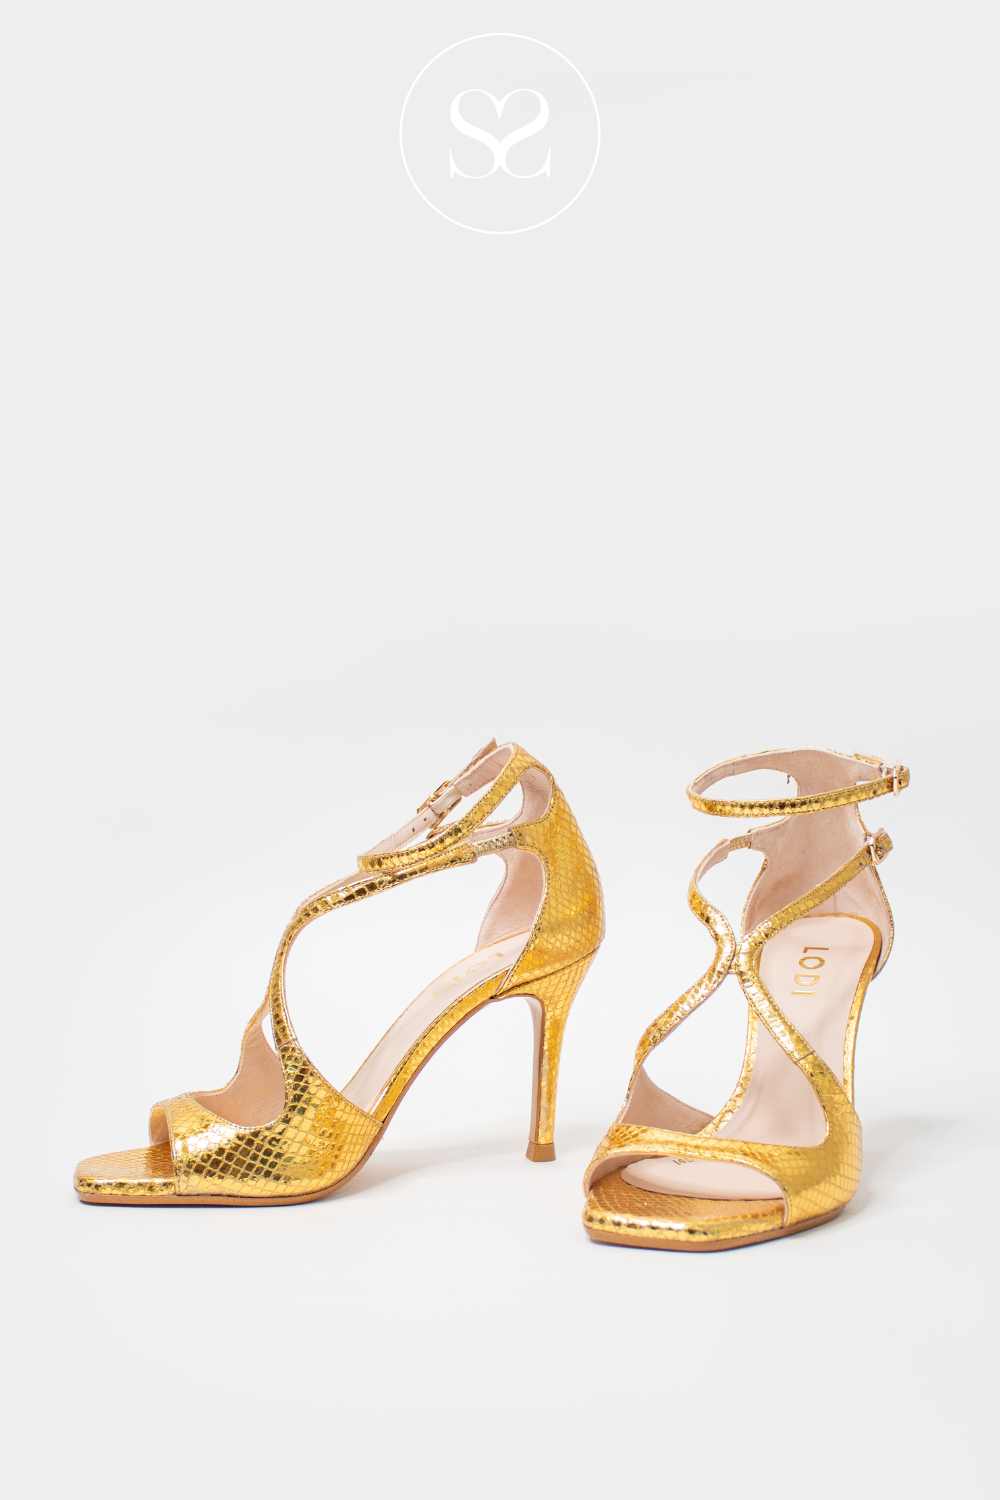 LODI SASUE ANTIQUE GOLD METALLIC GLADIATOR STYLE HIGH HEEL SANDALS WITH SQUARE TOE AND TWO ADJUSTABLE ANKLE STRAPS